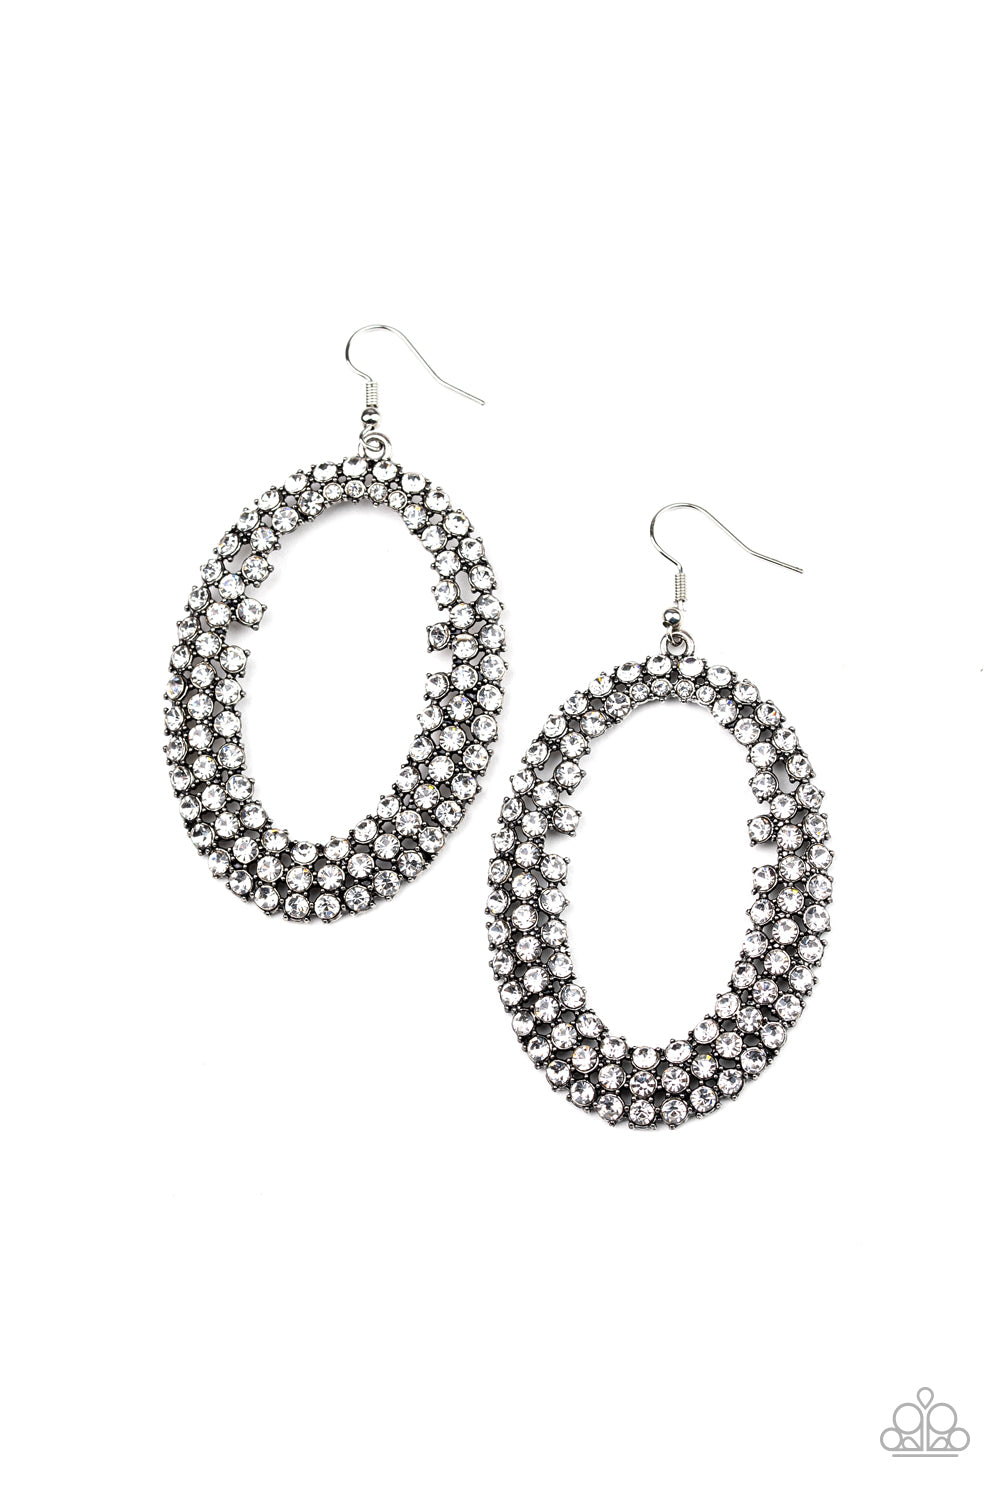 Radical Razzle White Rhinestone Earring - Paparazzi Accessories Item #E407 Row after row of glittery white rhinestones encircle into an oversized hoop, creating a gritty glamorous look. Earring attaches to a standard fishhook fitting. All Paparazzi Accessories are lead free and nickel free!  Sold as one pair of earrings.